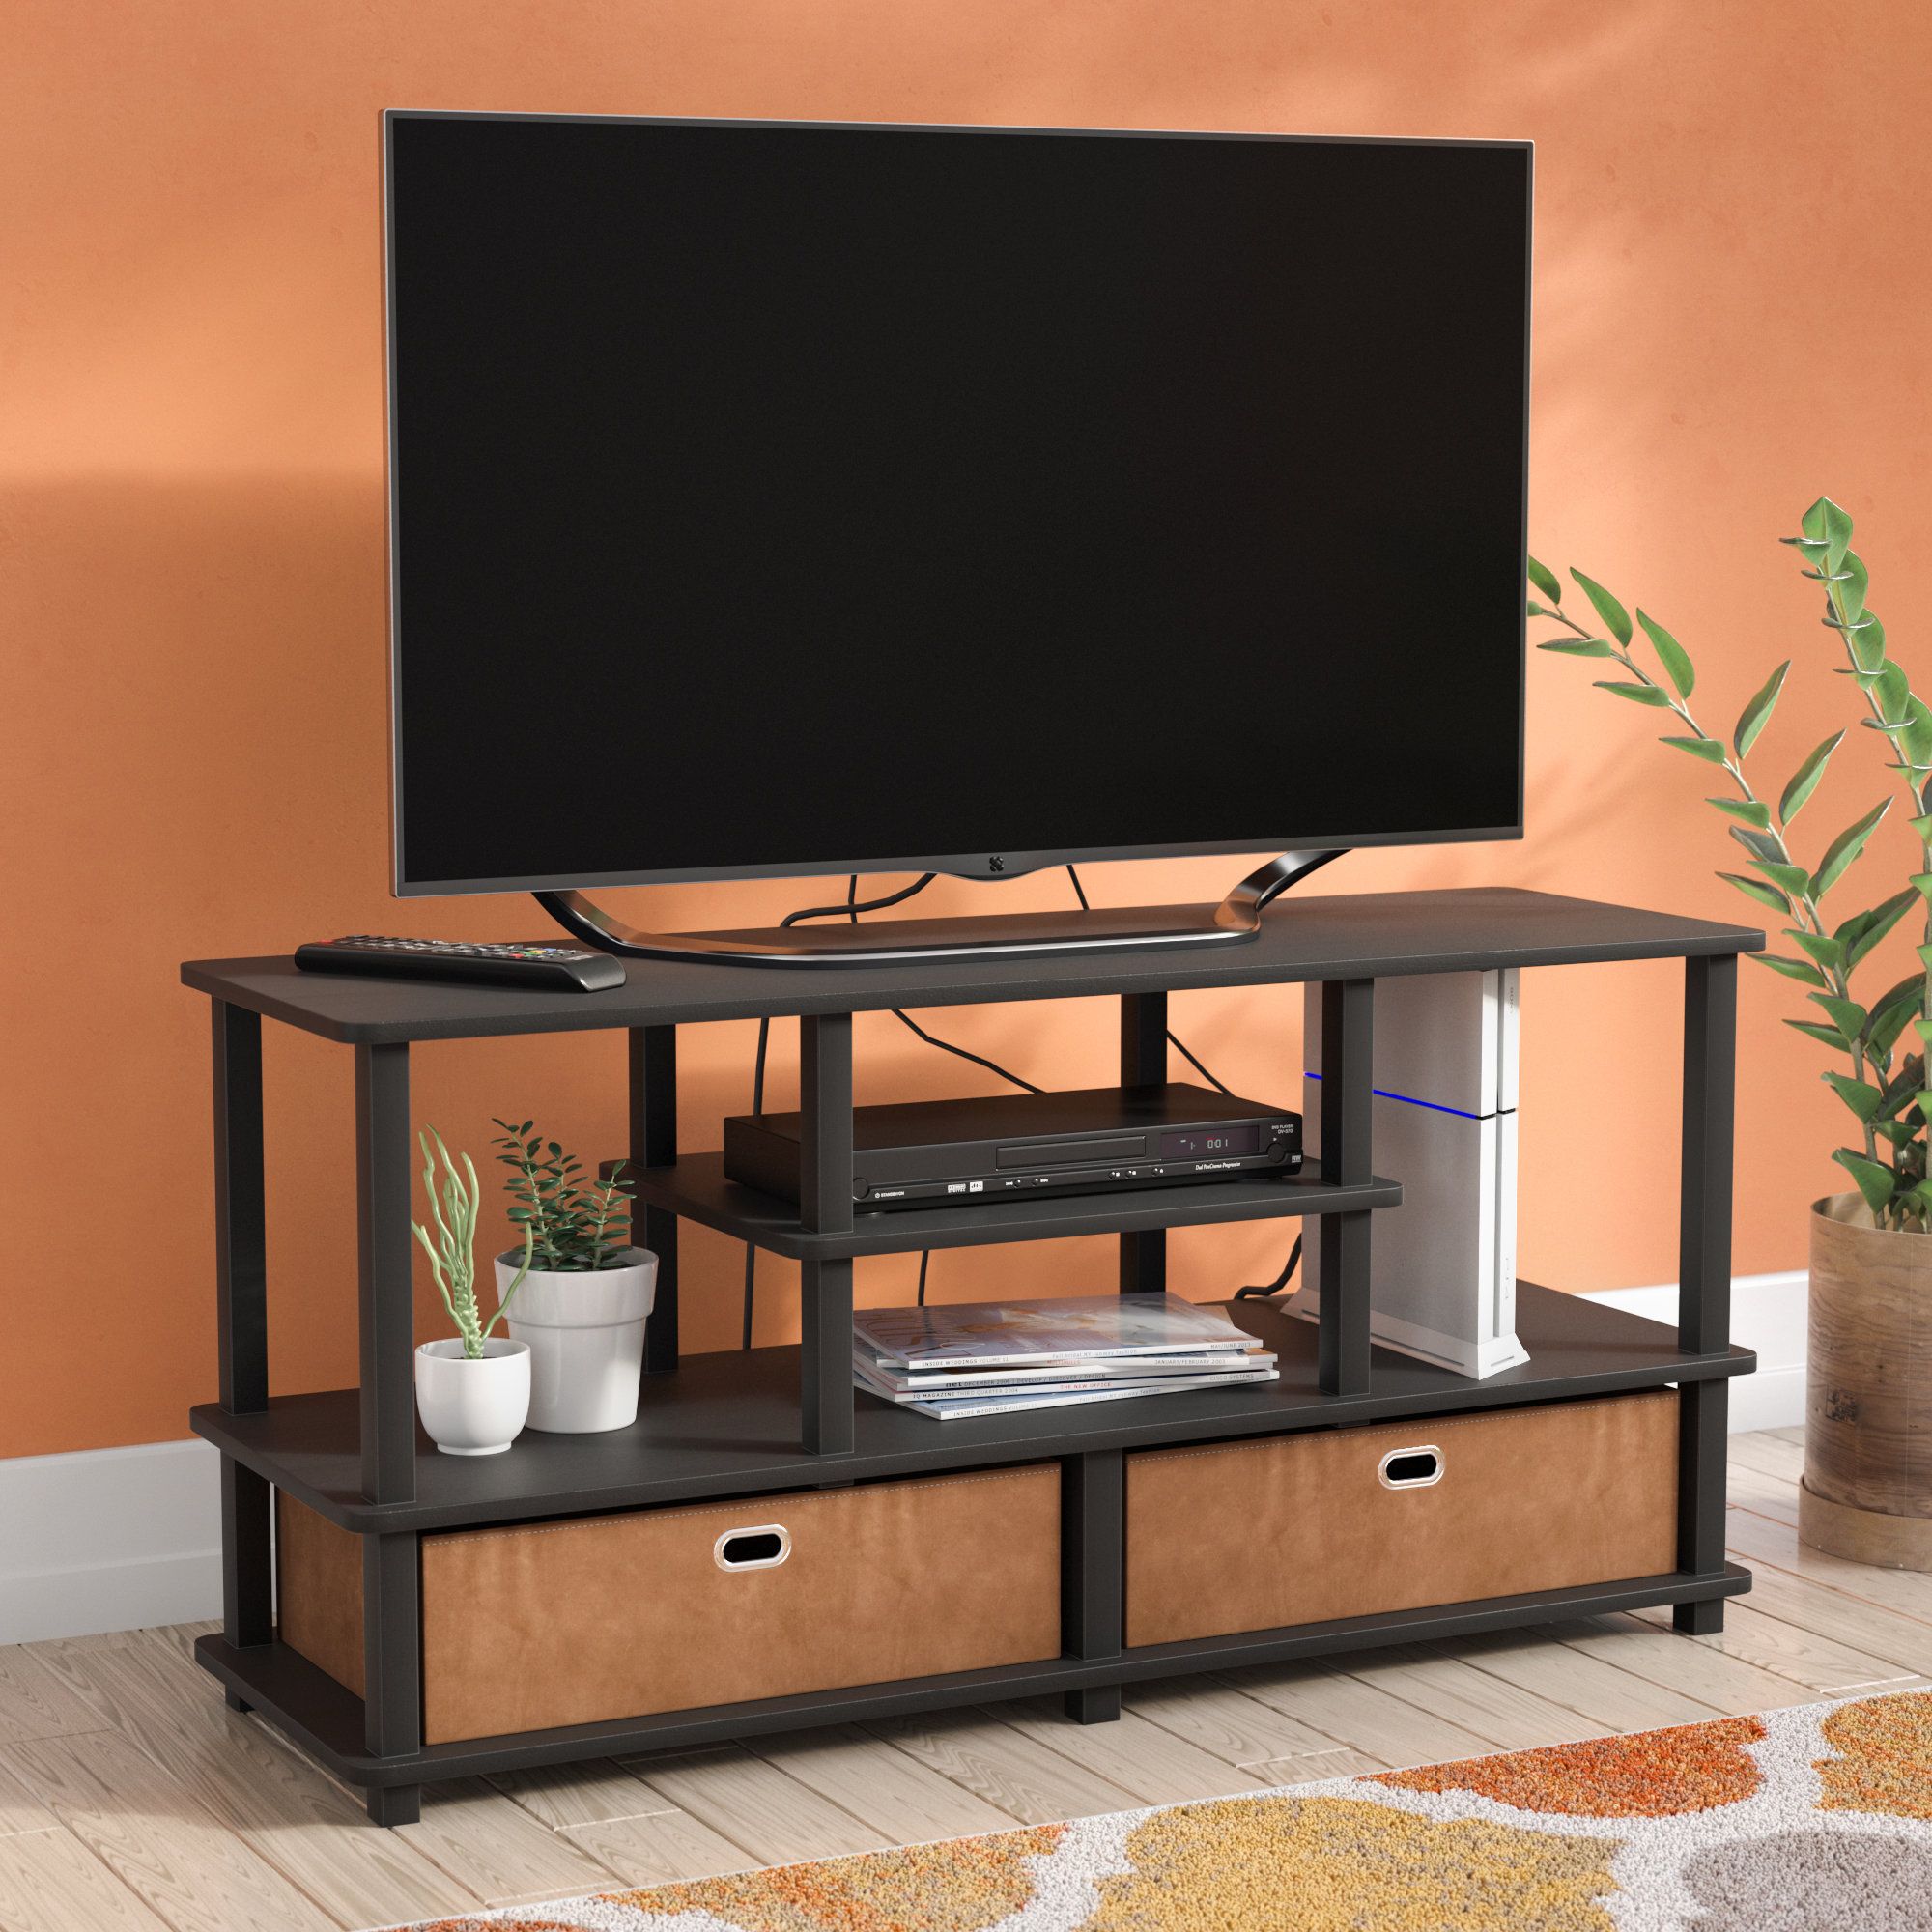 50+ Reclaimed Wood Tv Stand You'll Love In 2020 – Visual Hunt With Regard To Wooden Tv Stands For 50 Inch Tv (View 5 of 15)